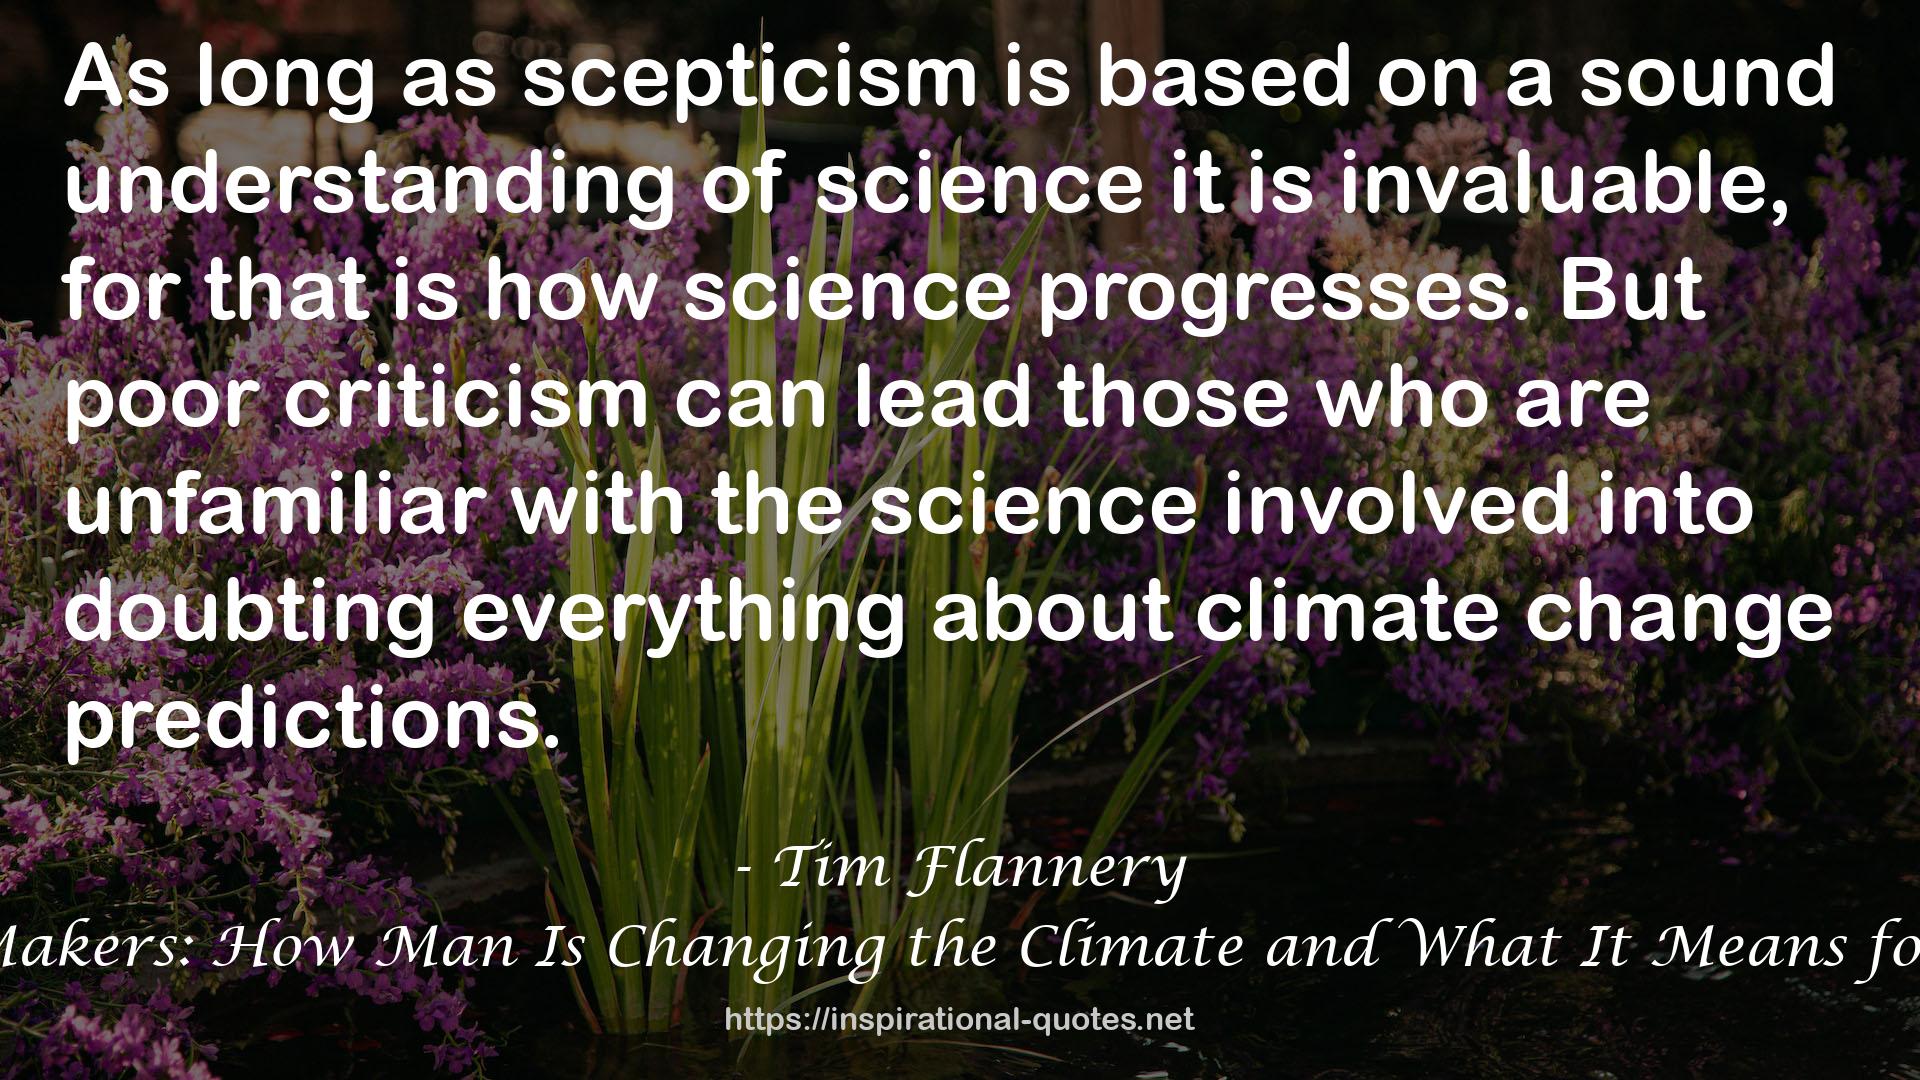 Tim Flannery QUOTES